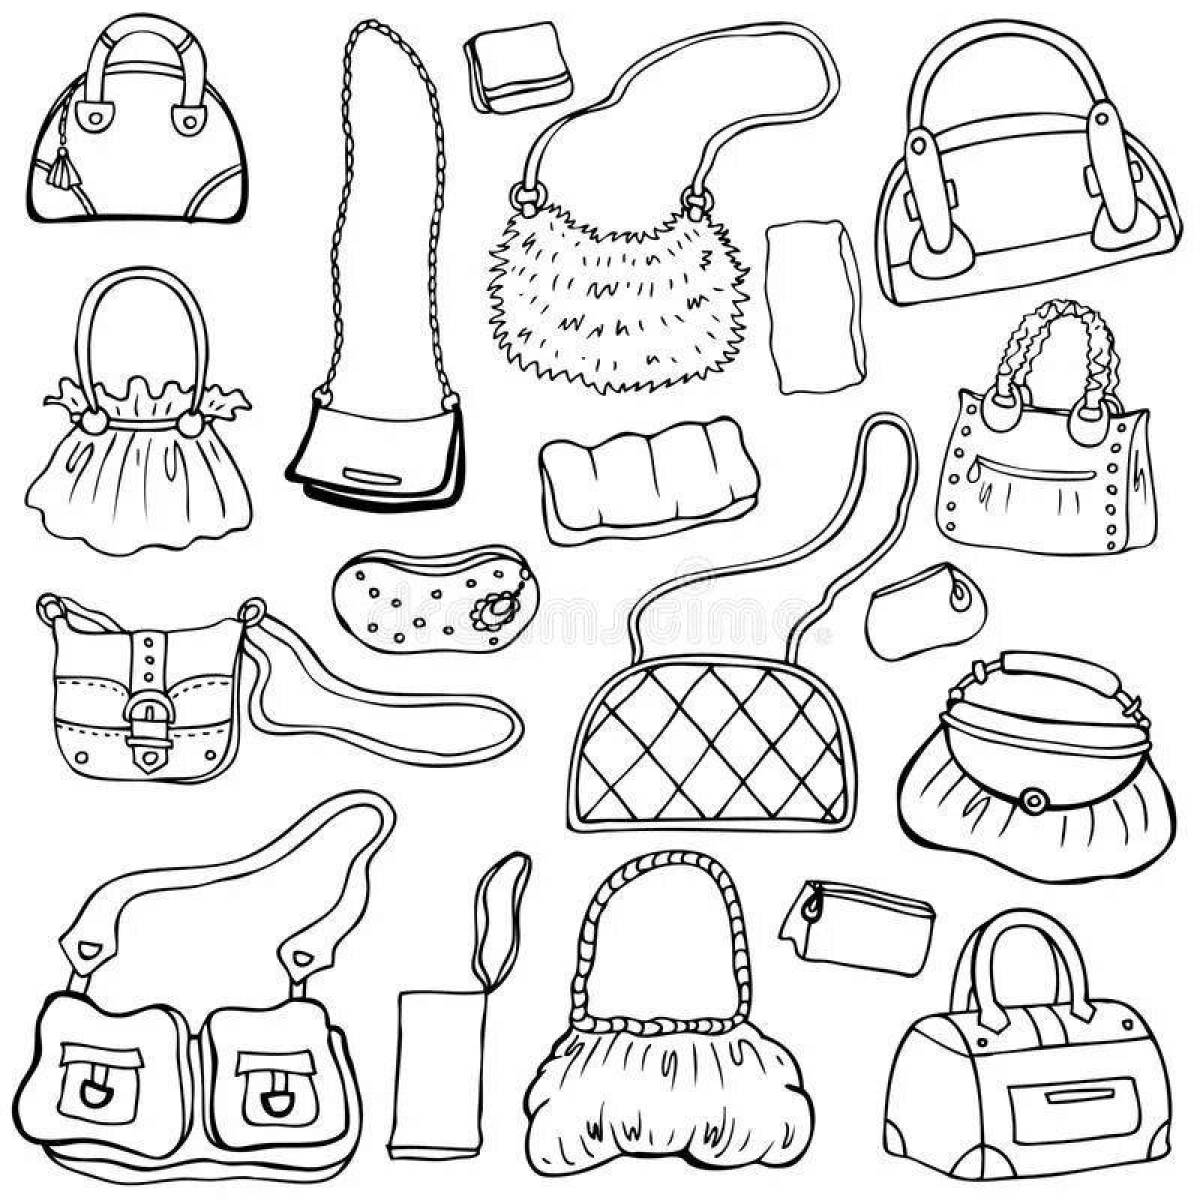 Coloring accessories for coloring